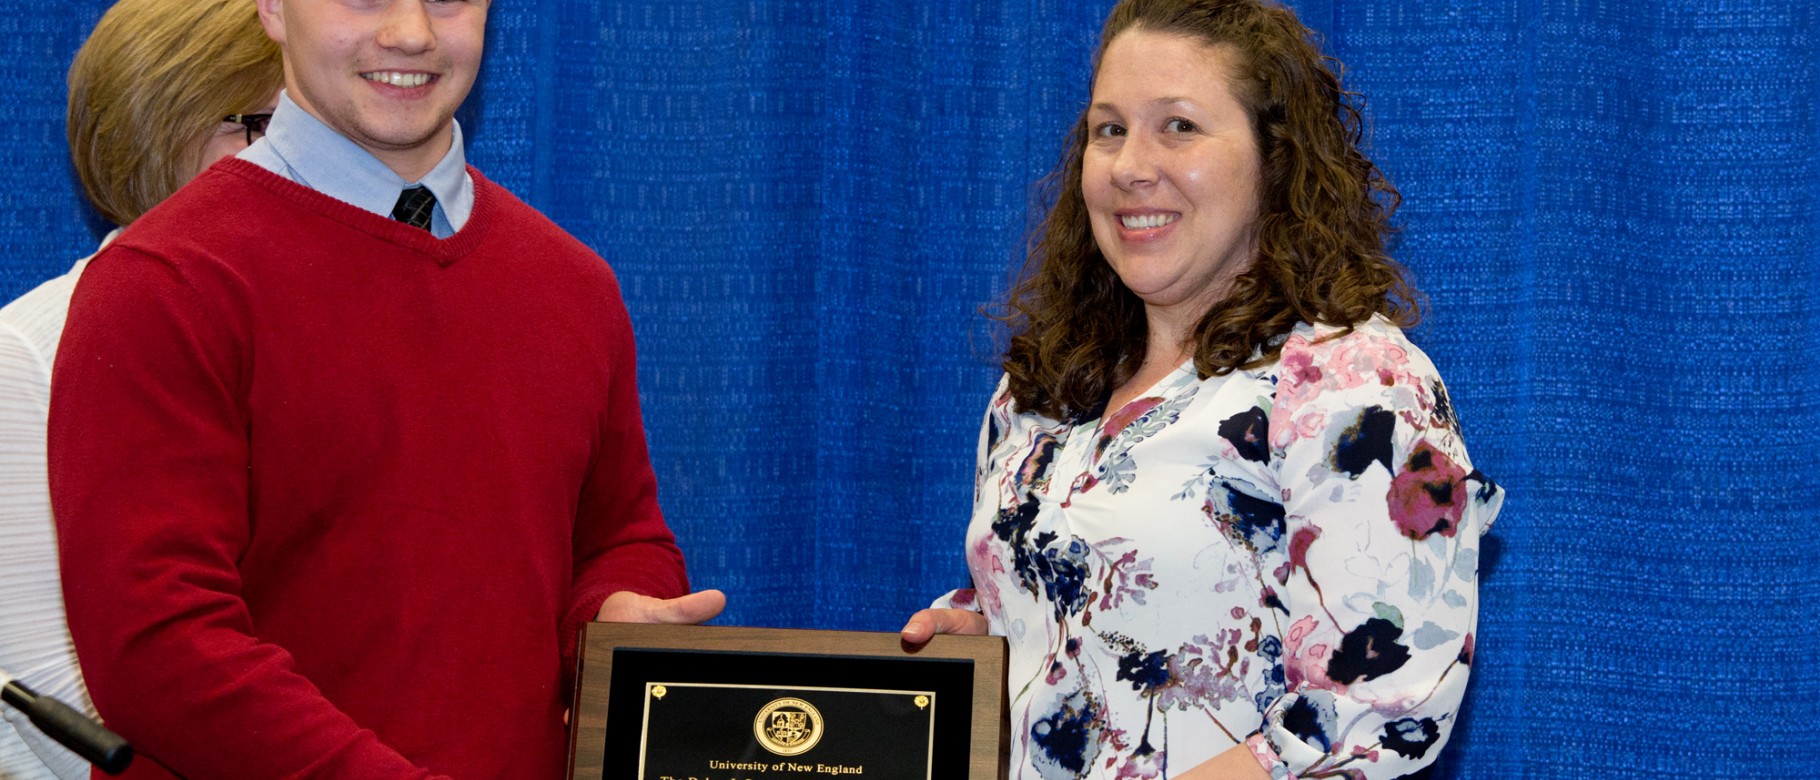 Amy Keirstead, Ph.D., professor of chemistry, receives the Debra J. Summers Memorial Award for Teaching in Excellence from Jesse